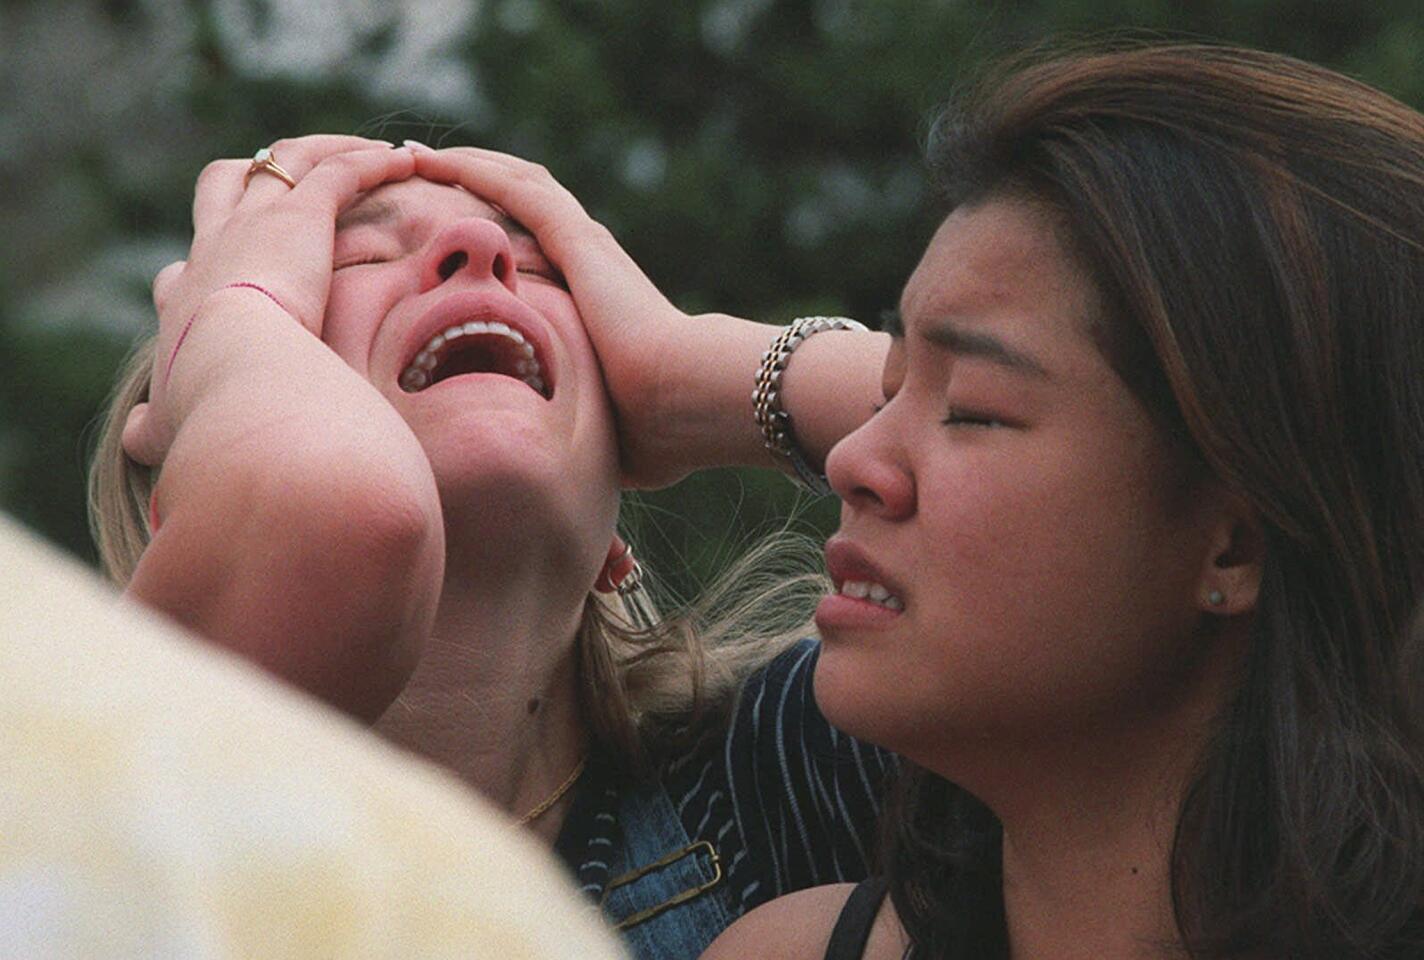 Columbine High School students react at a triage site near the school in Littleton, Colo., after the shooting April 20, 1999.